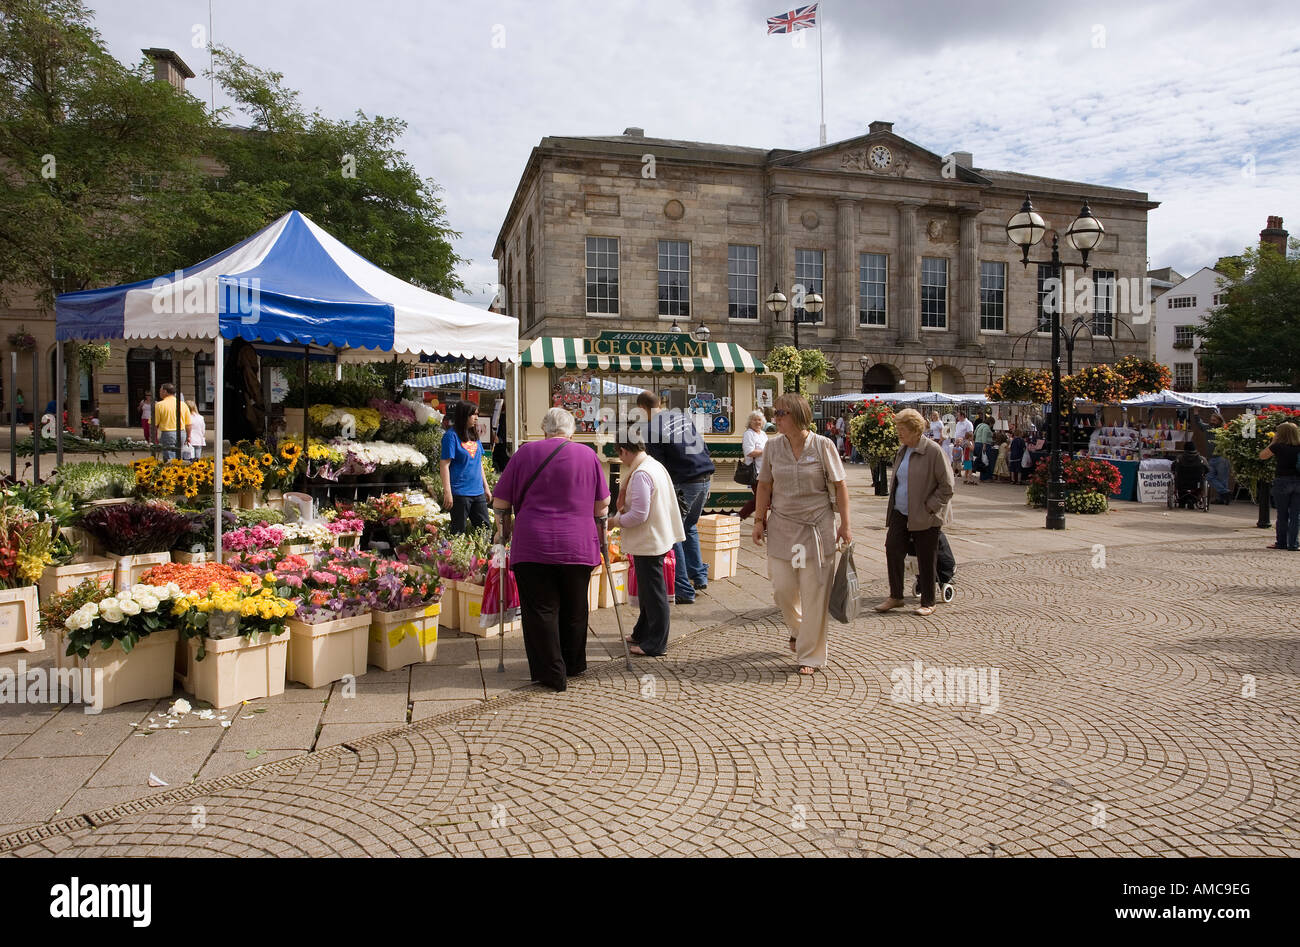 Shire Hall and Market Square, Stafford, Staffordshire, England Stock Photo